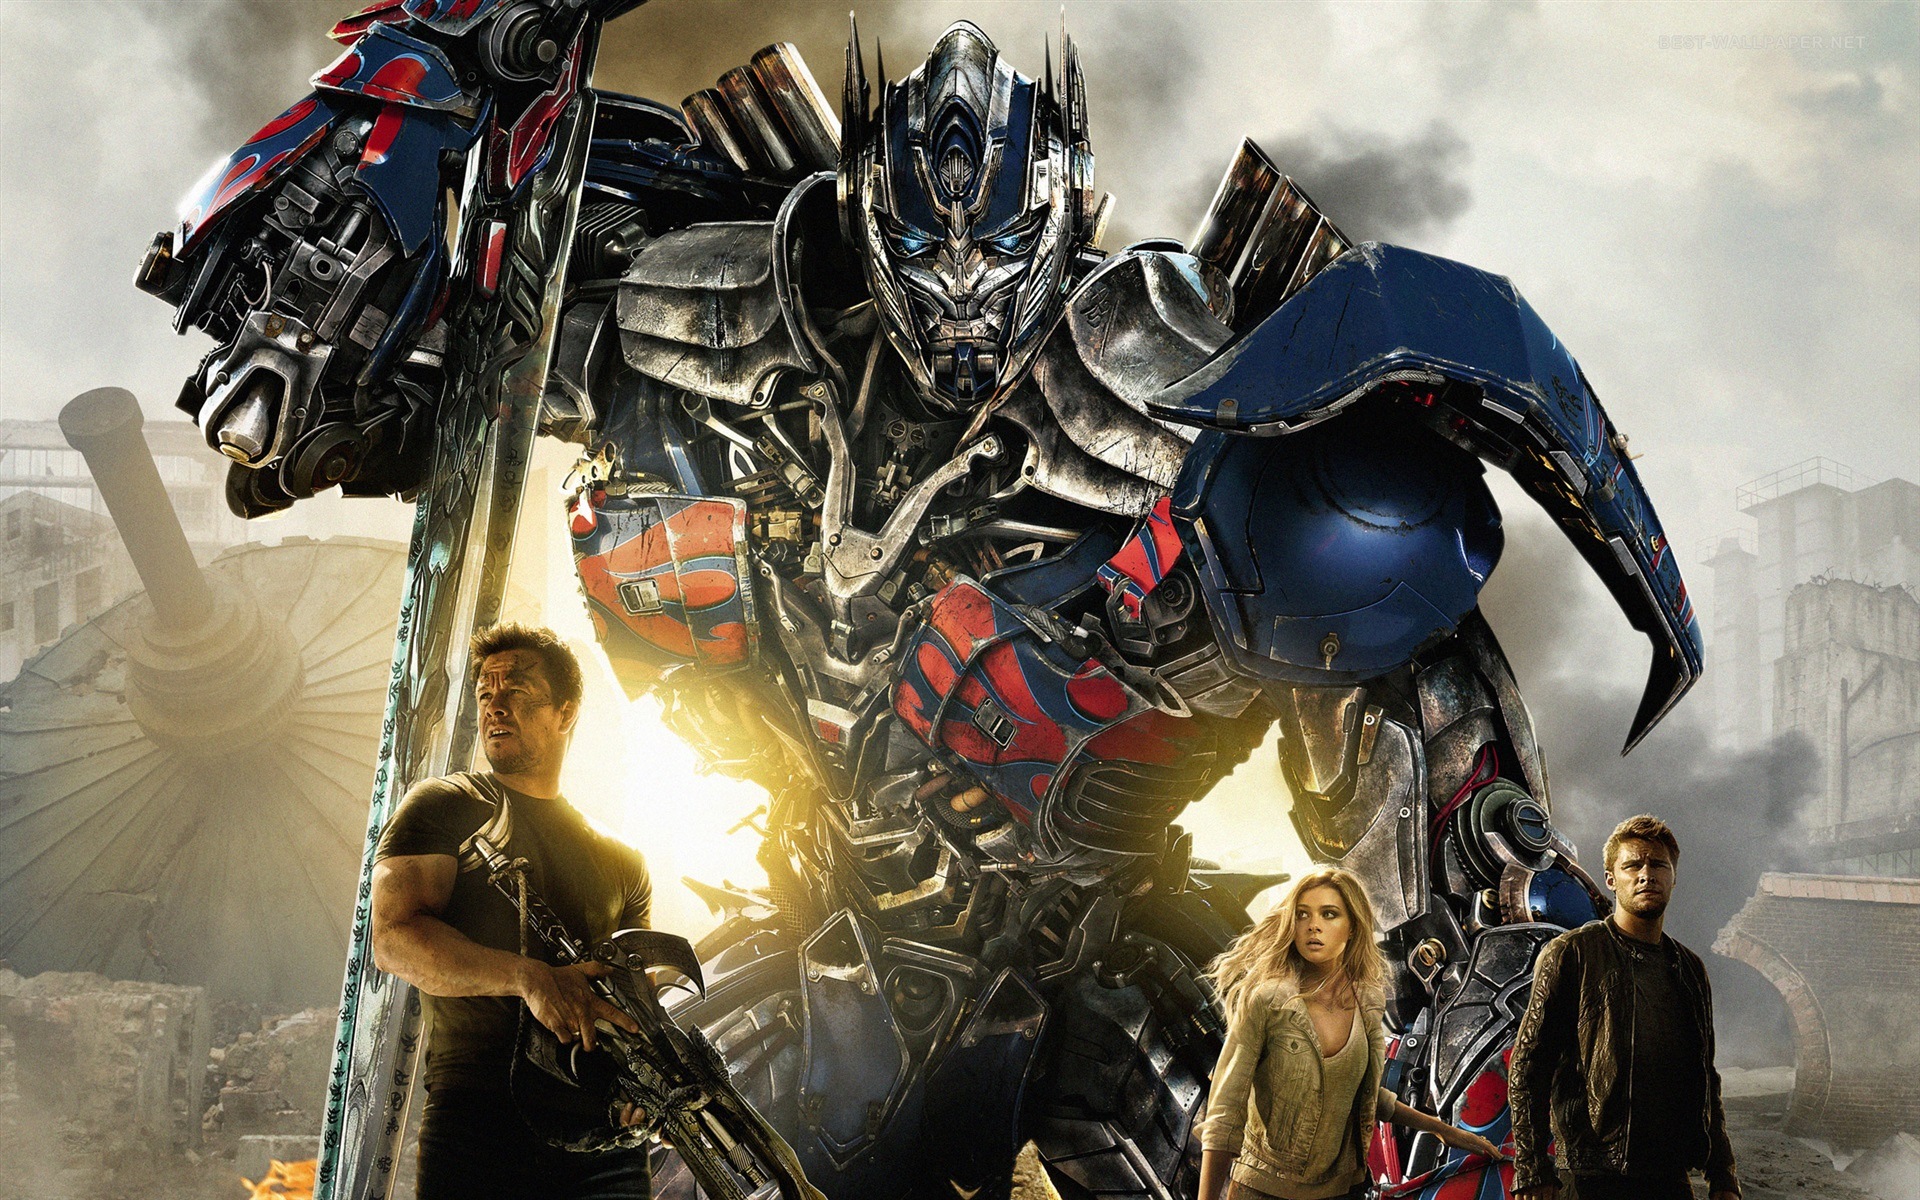 2014 Transformers: Age of Extinction HD tapety #1 - 1920x1200